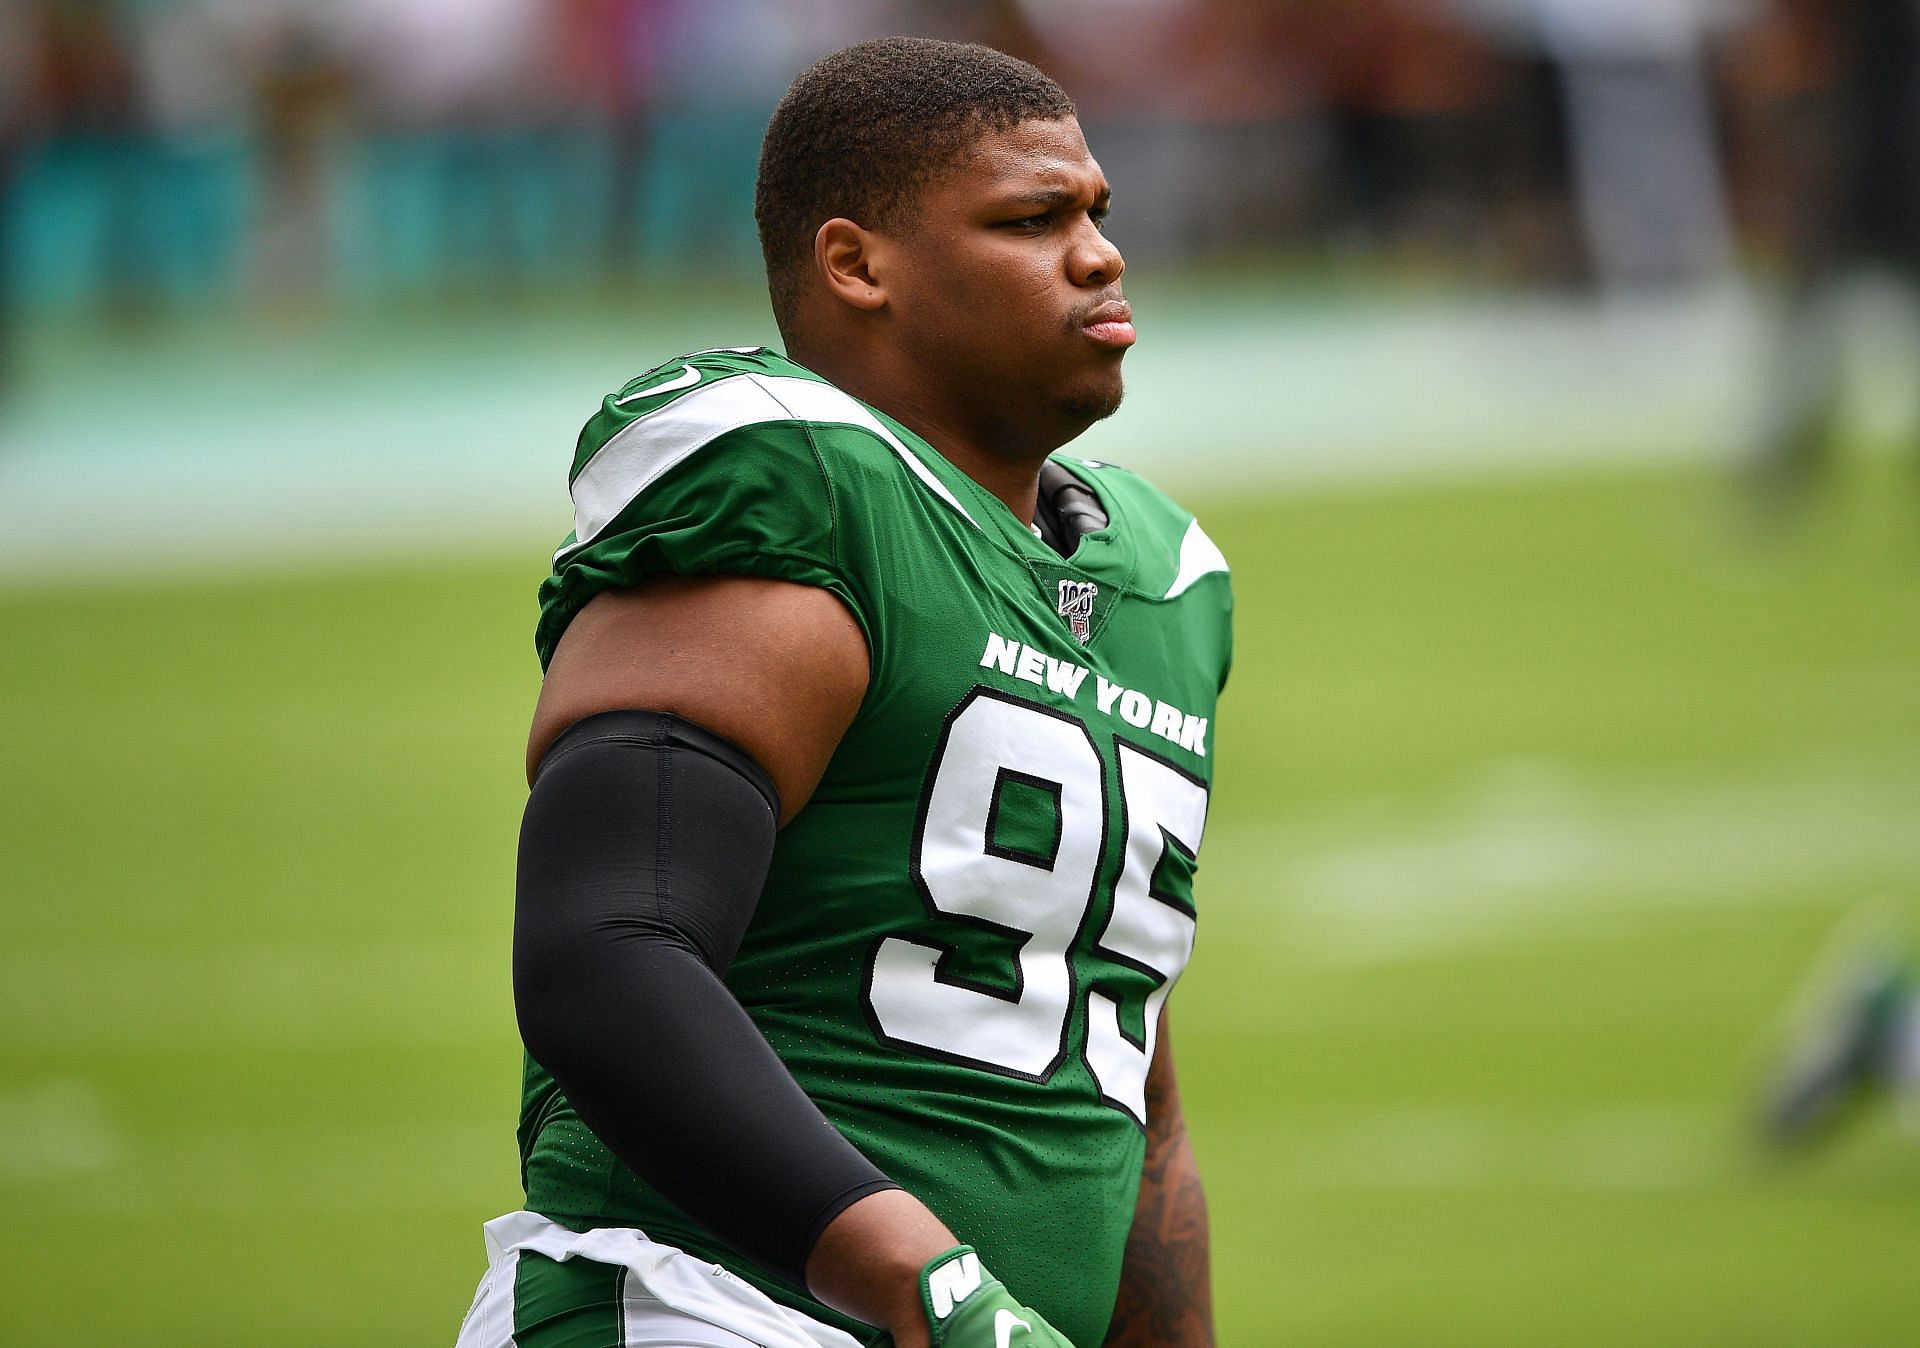 Quinnen Wiliams at New York Jets v Miami Dolphins